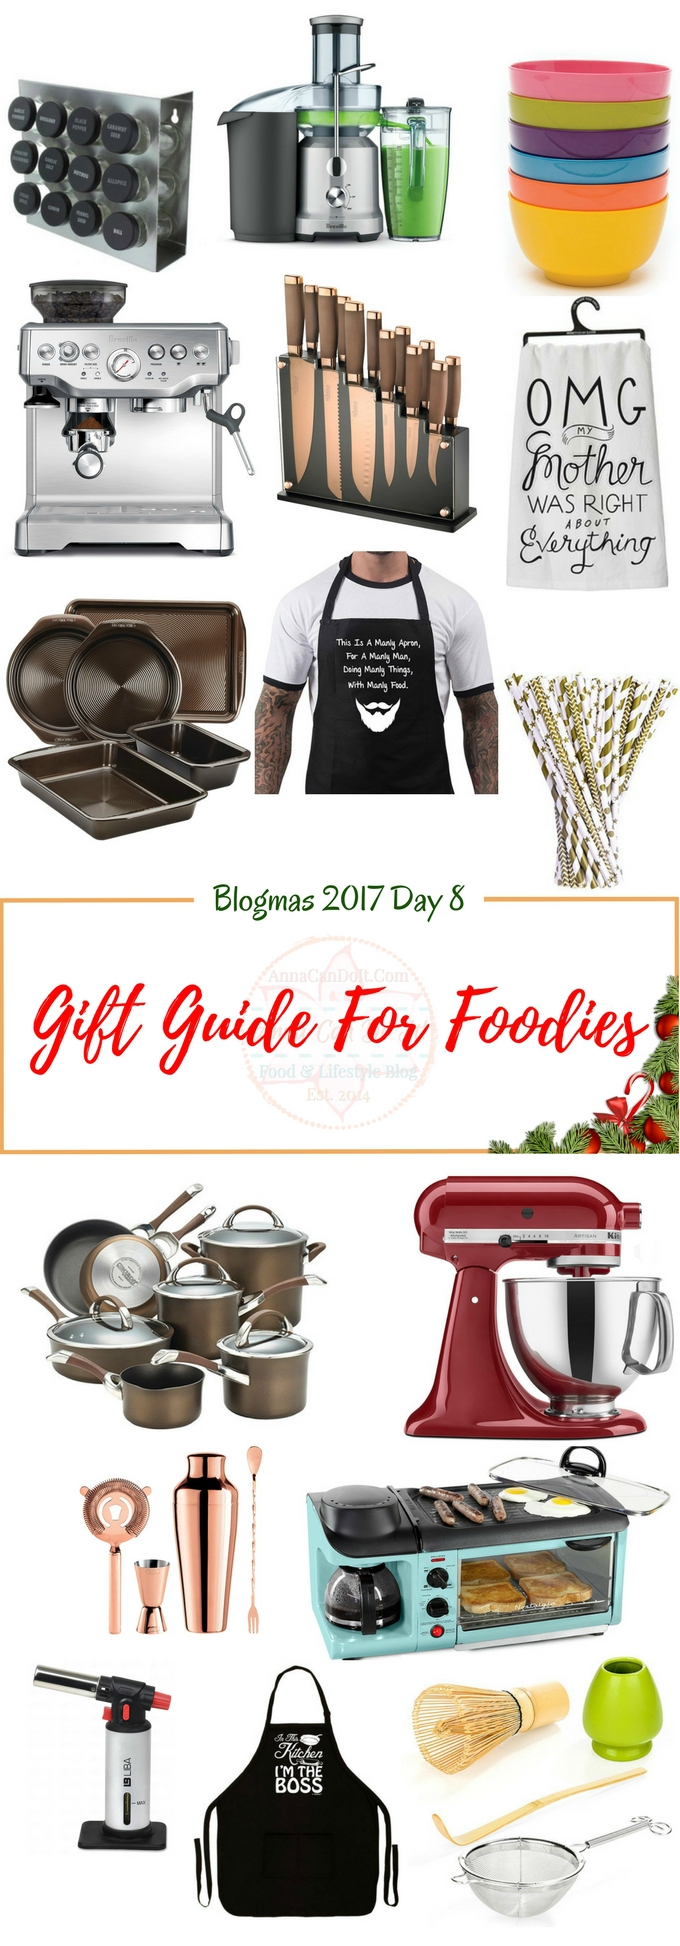 Gift Guide For Foodies - Blogmas 2017 Day 8 - Anna Can Do It!